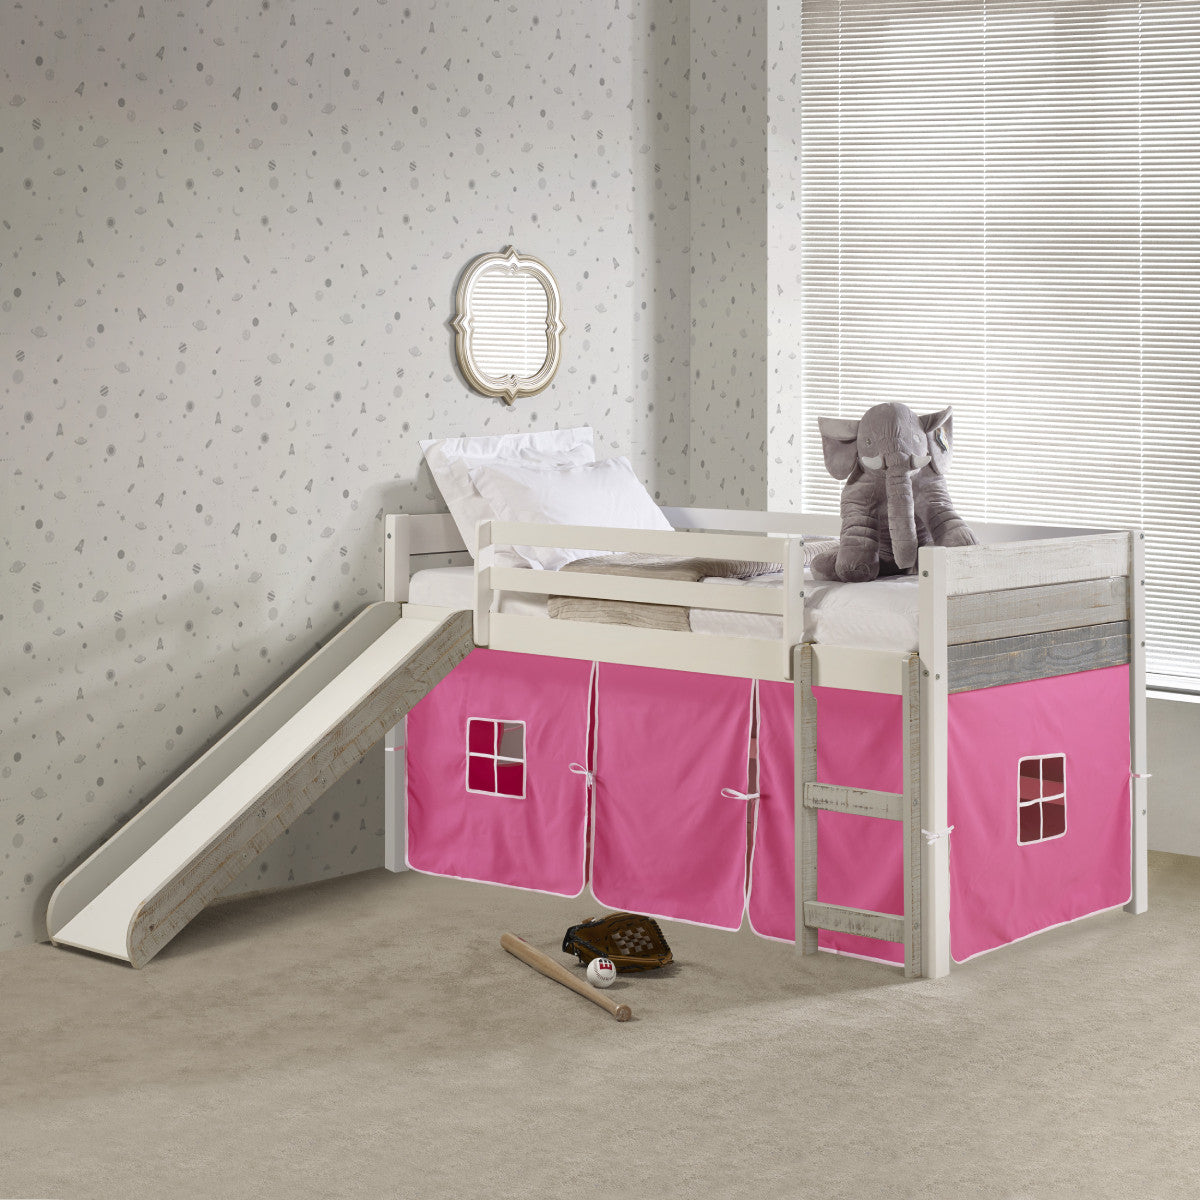 TWIN PANEL LOW LOFT BED WITH SLIDE IN TWO-TONE GREY/WHITE FINISH & PINK TENT KIT